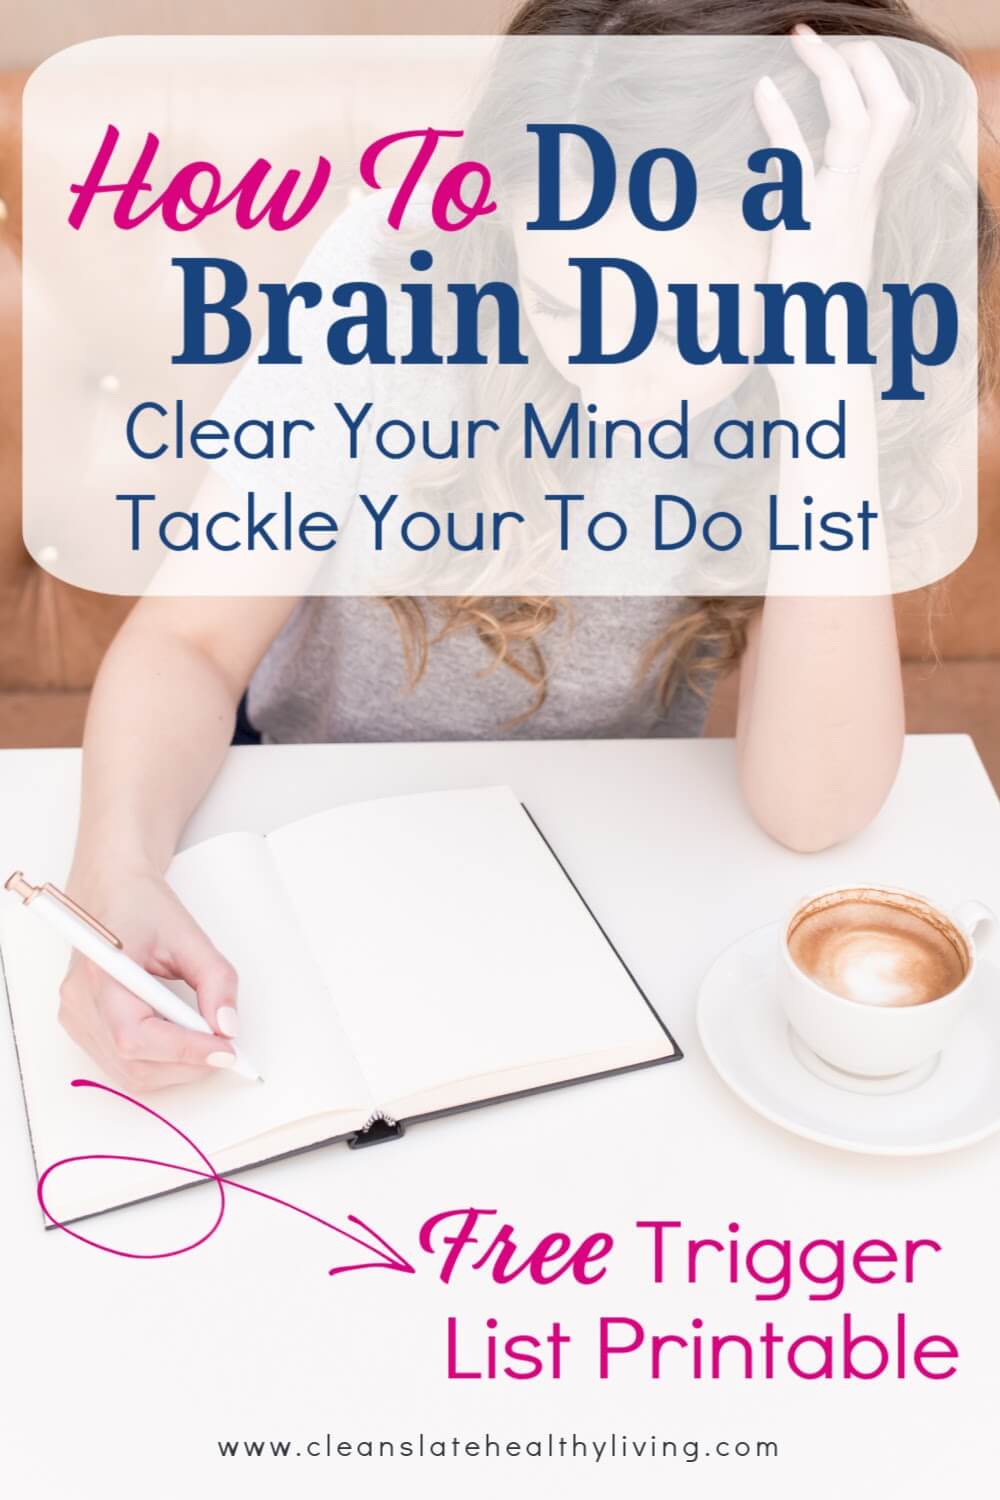 how-to-do-a-brain-dump-to-clear-your-mind-and-tackle-your-to-do-list